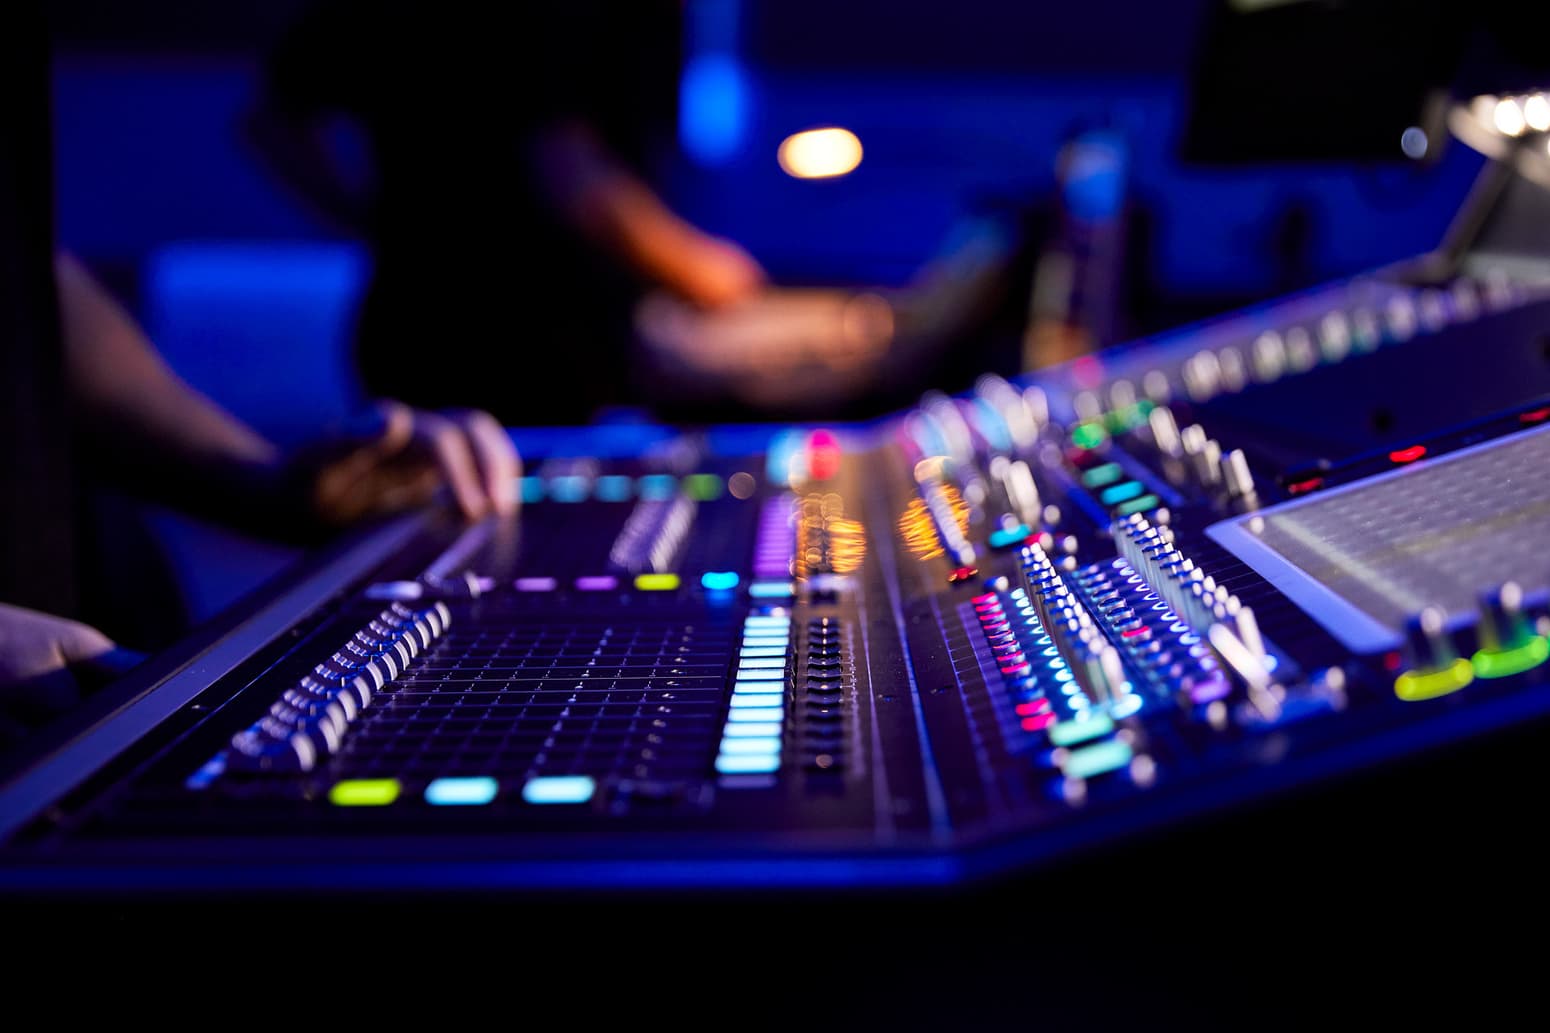 Sound board used for AVL sound design system by Paragon 360.